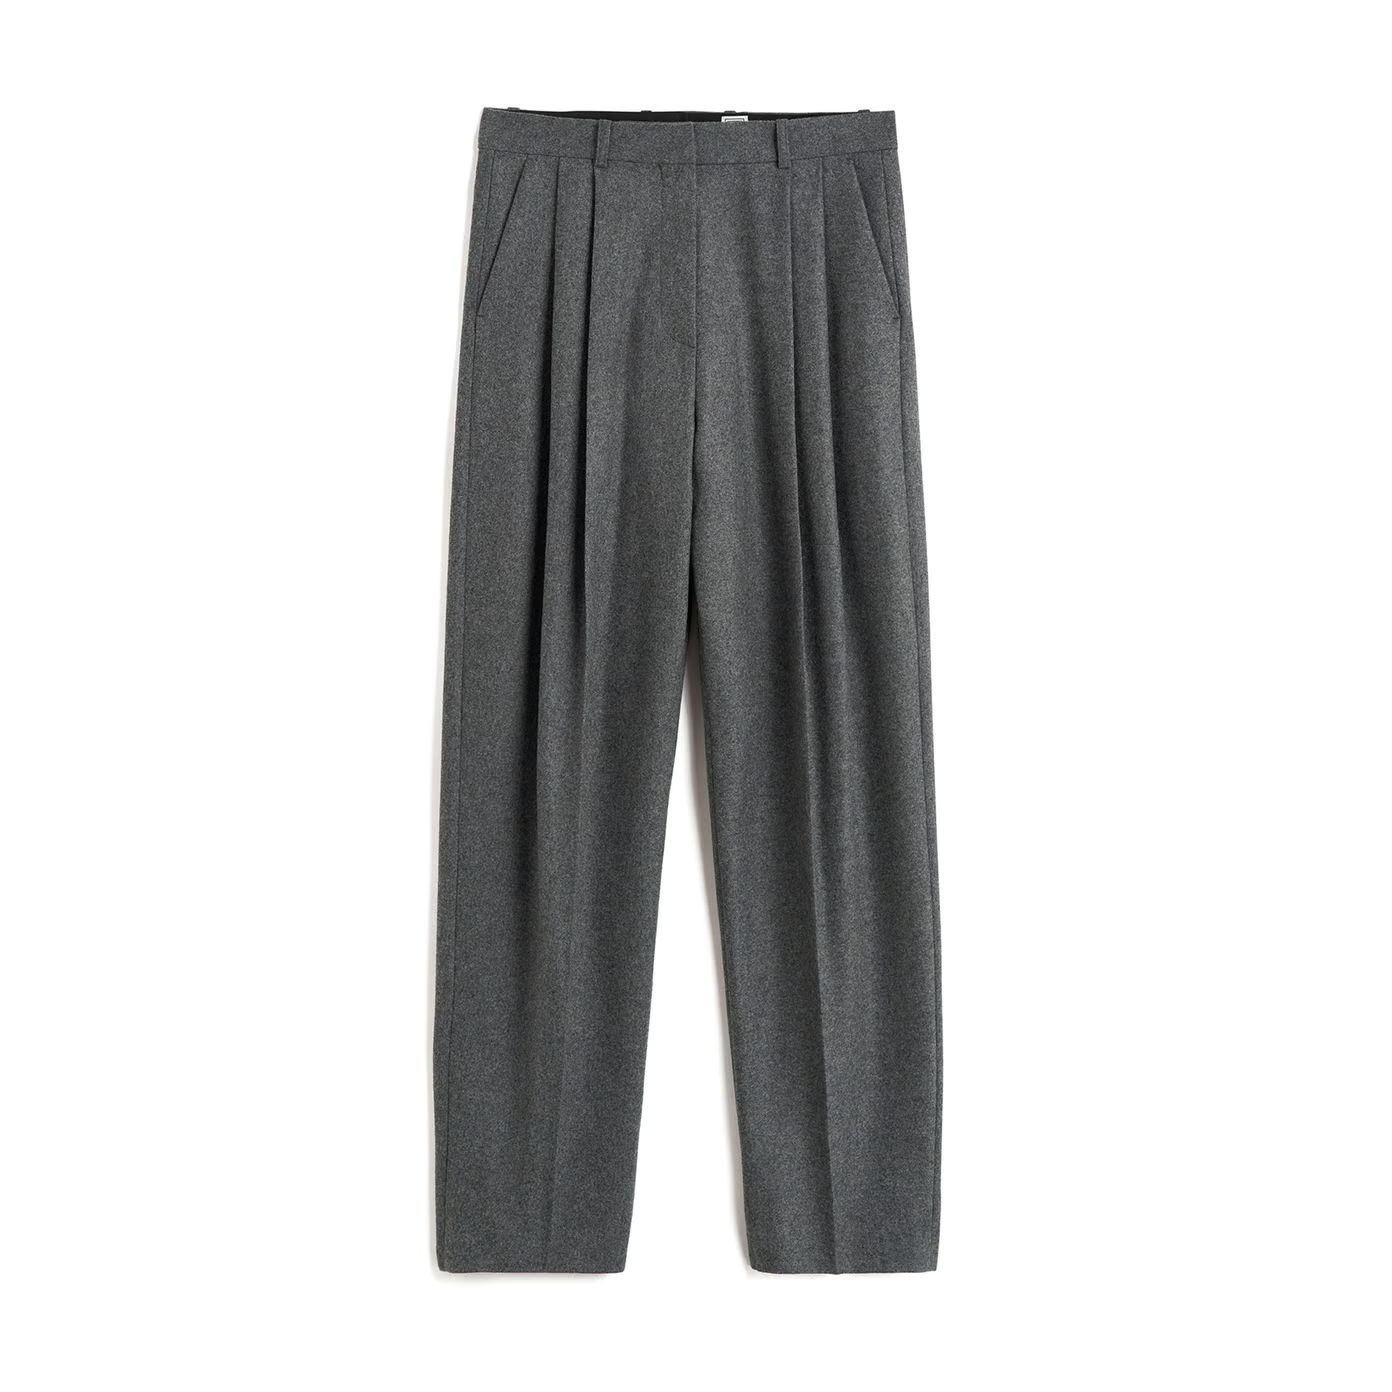 Toteme Double-Pleated Tailored Trousers | goop | goop